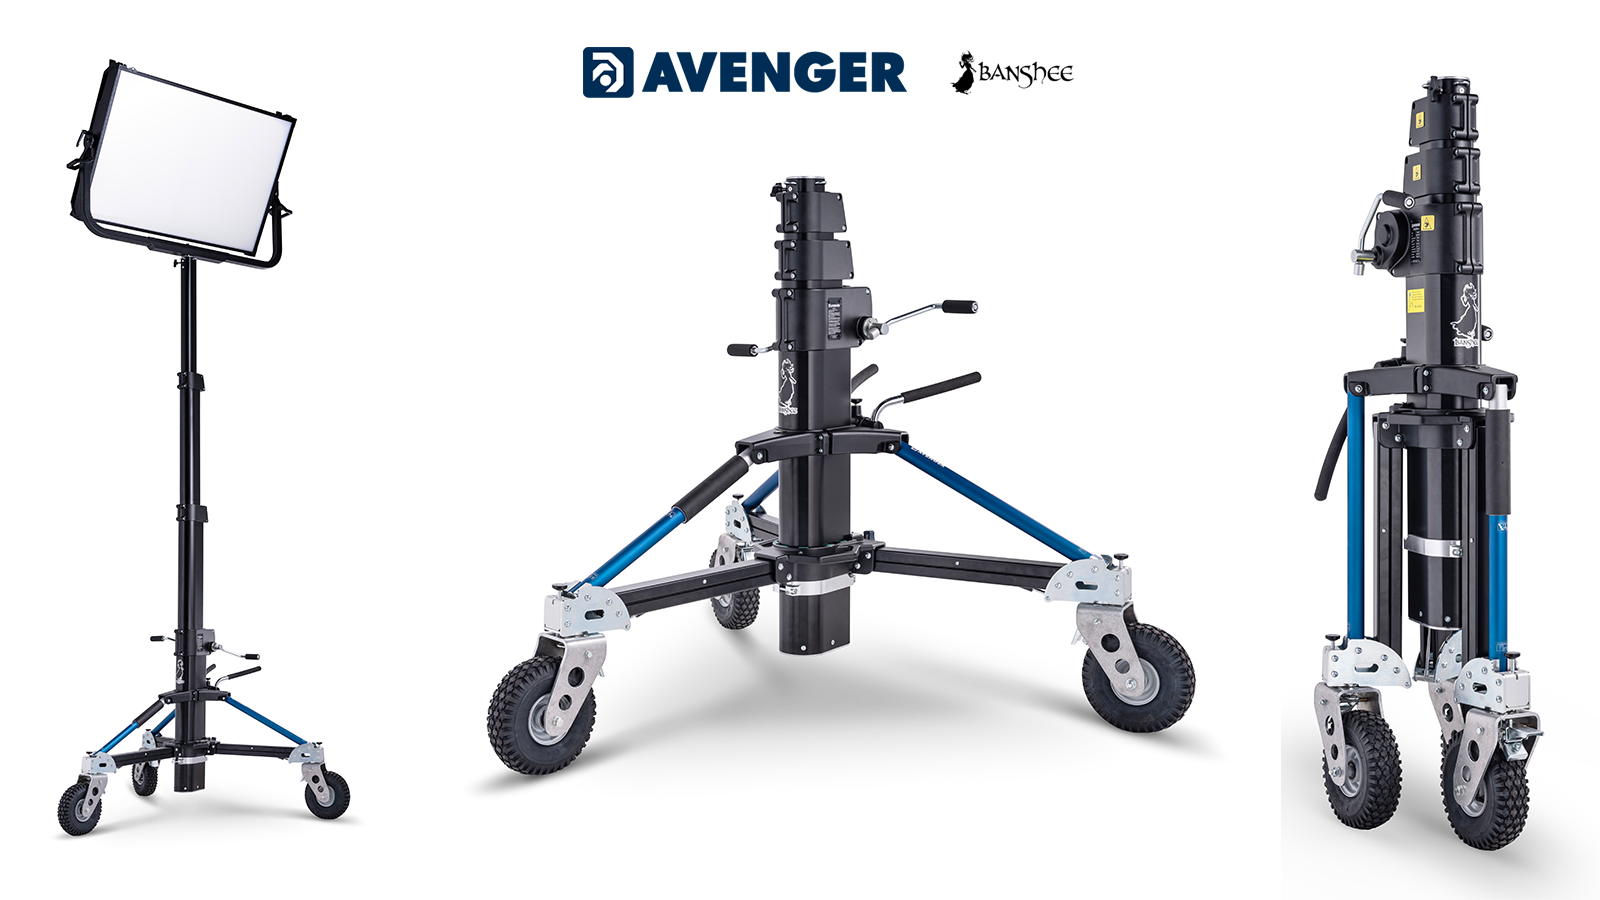 Avengers Banshee heavy-duty cine lighting support shown in three configurations with a light open stand and folded